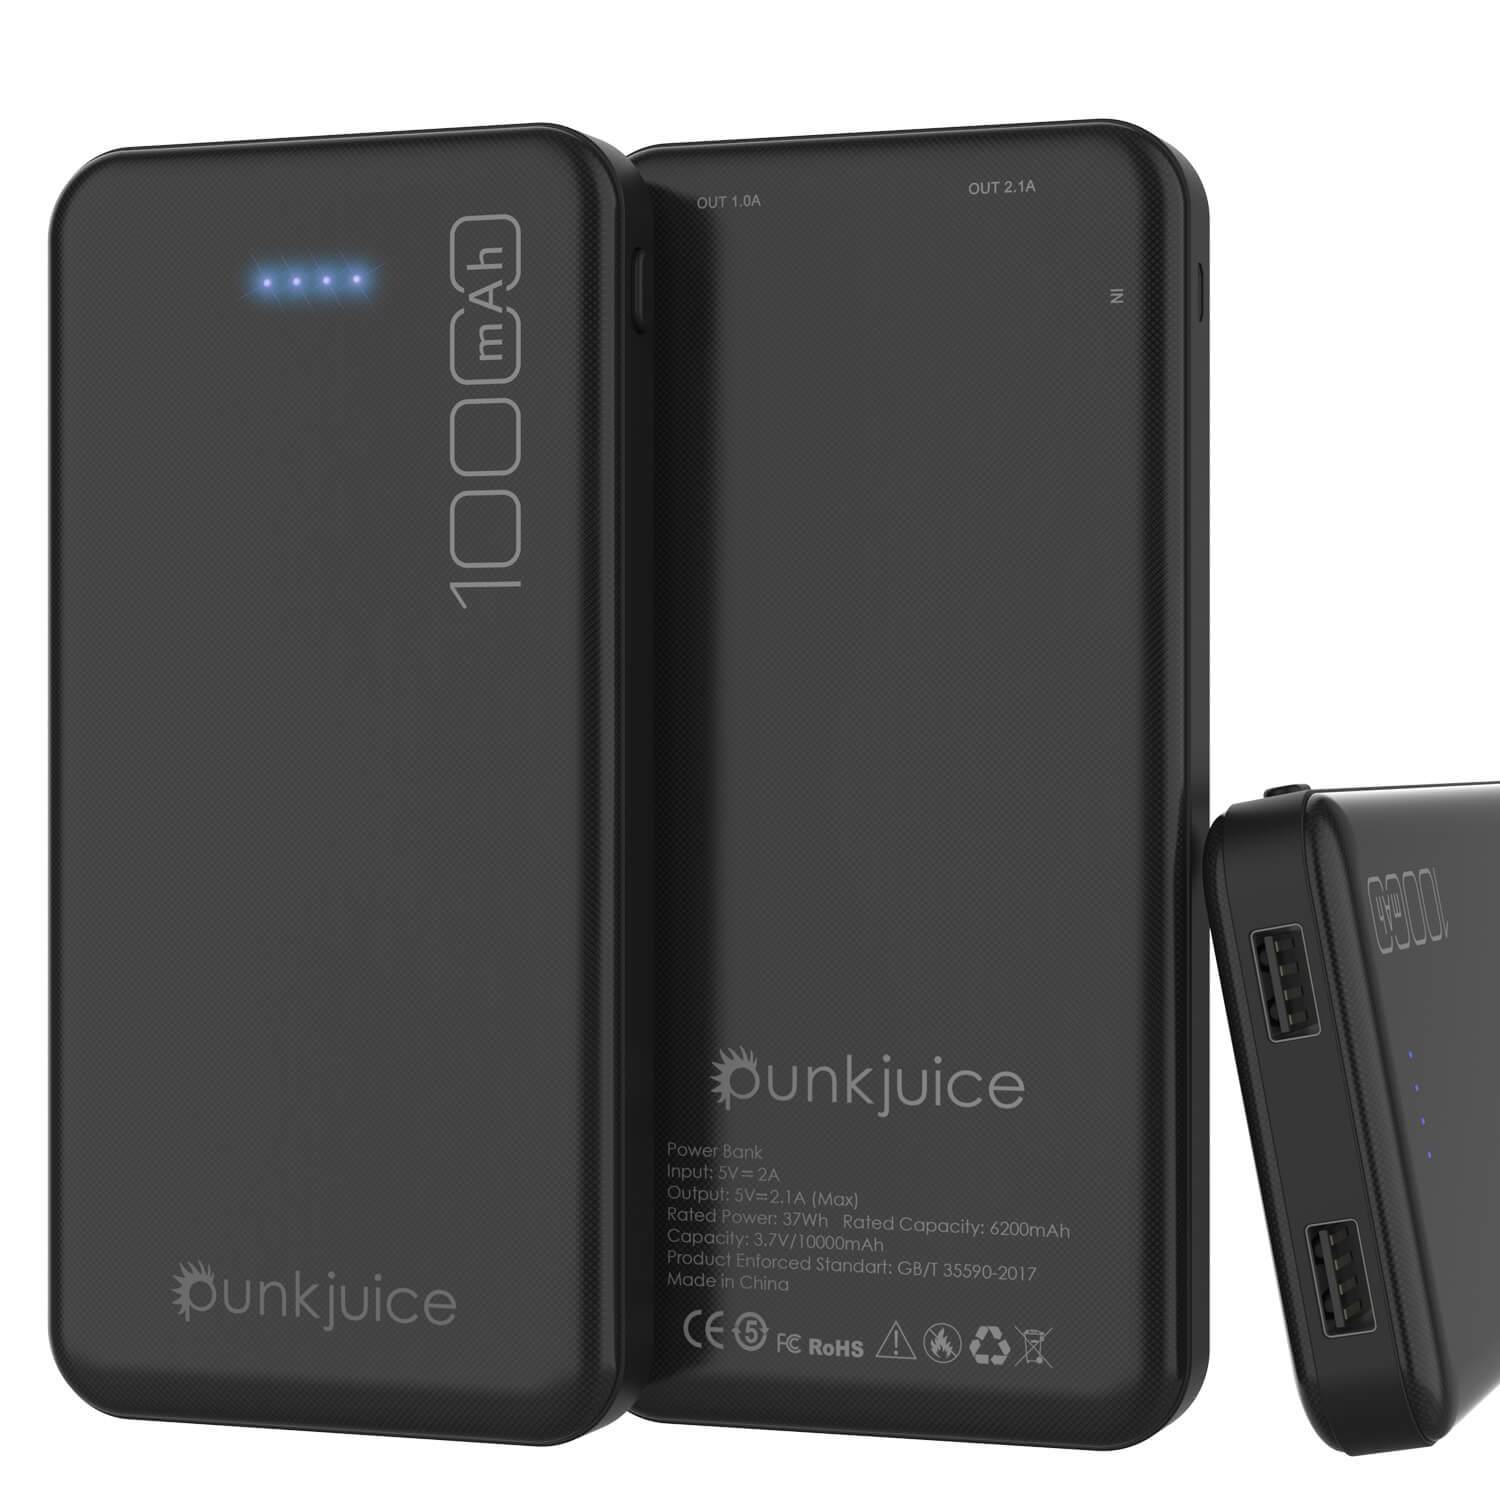 PunkCase PowerBank 10000mah Battery Pack for iPhone X/XS/Max/XR / 11/10, iPad, Samsung Galaxy S10 / S9 and Many More [Black] (Color in image: Black)